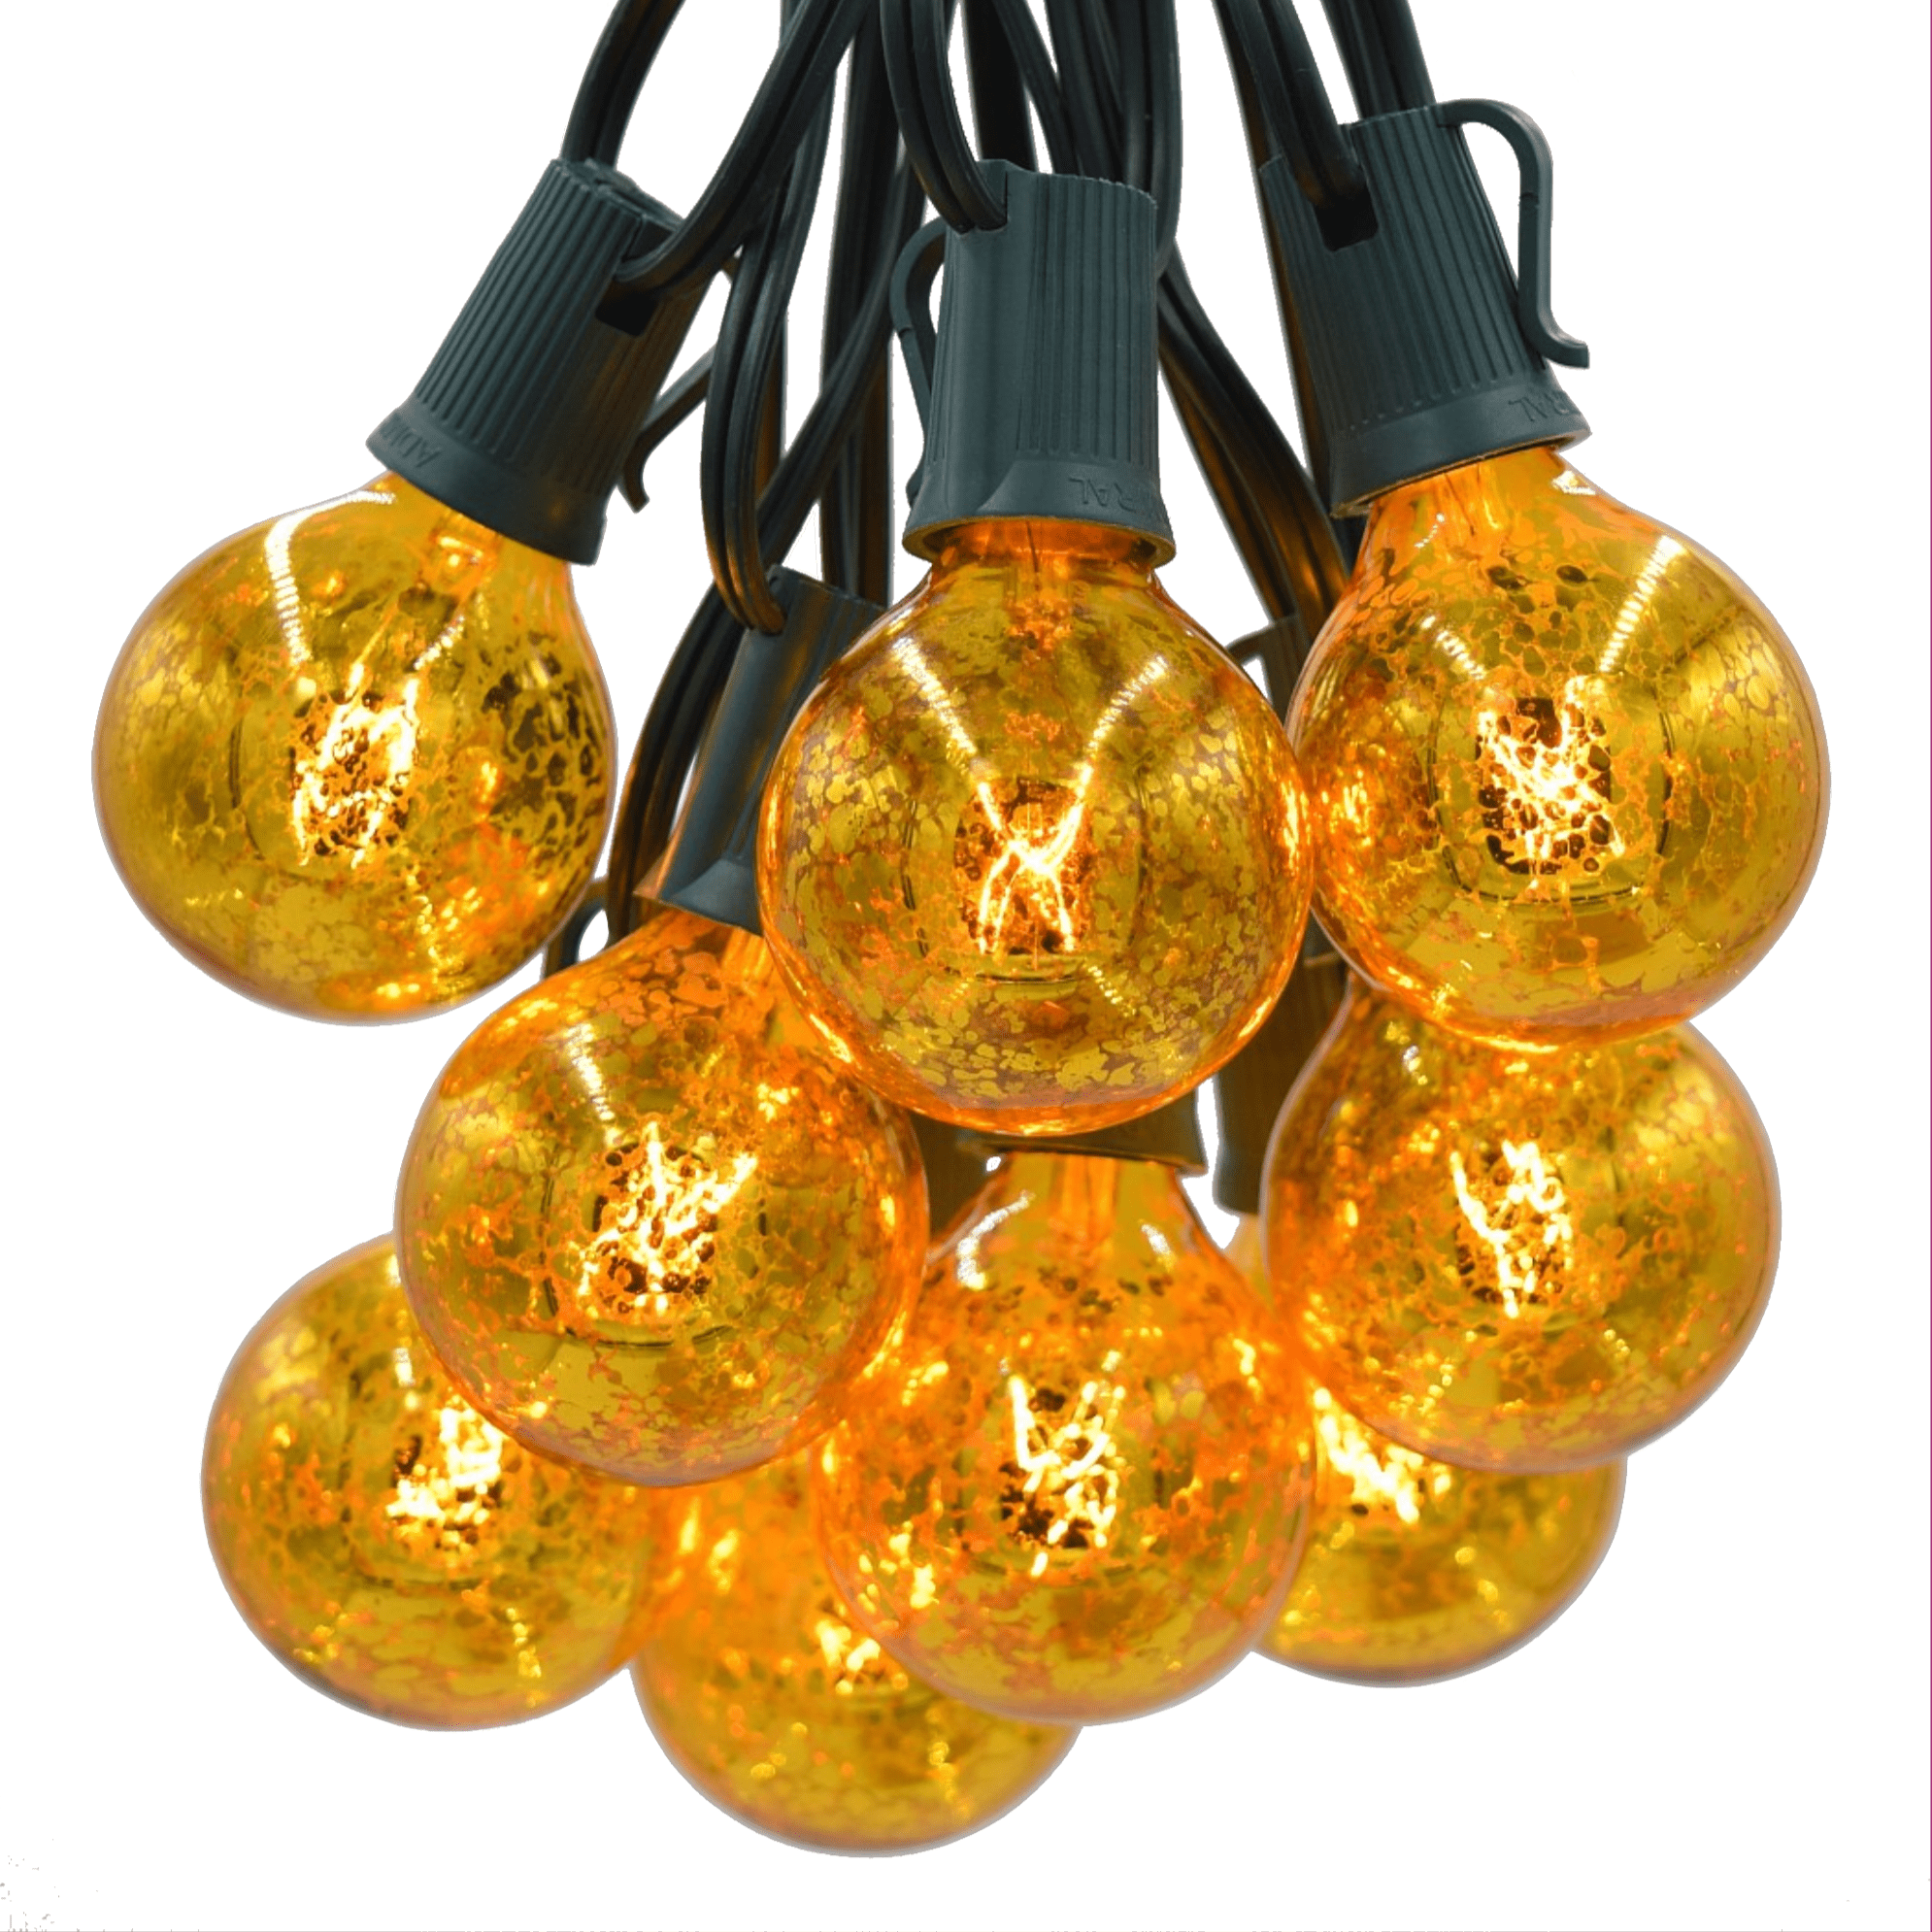 G40 Mercury Gold String Light Sets with White Wire - Hometown Evolution Inc.